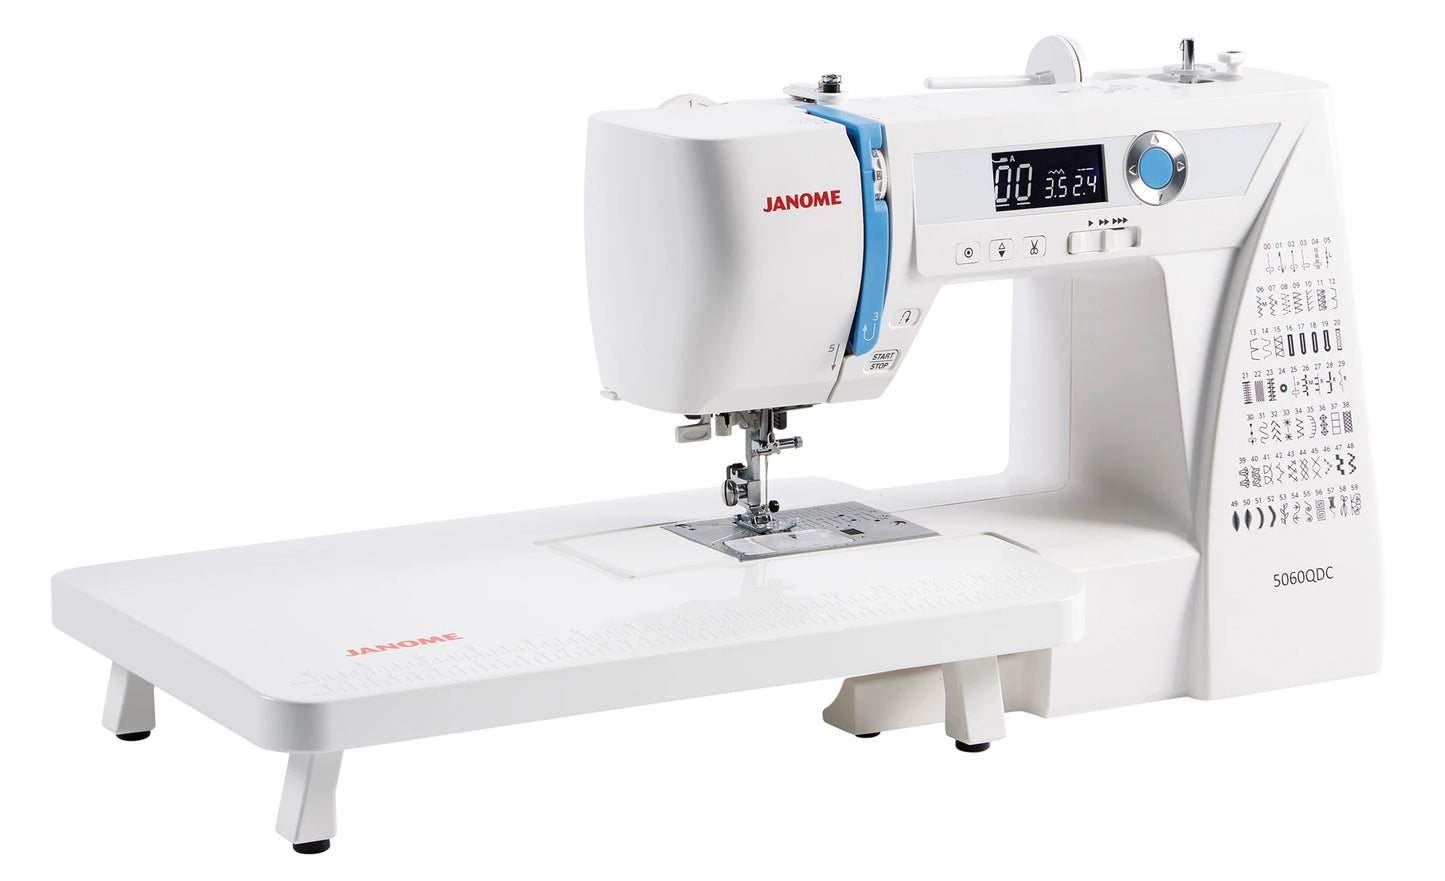 The Janome Model 5060QDC Sewing Machine